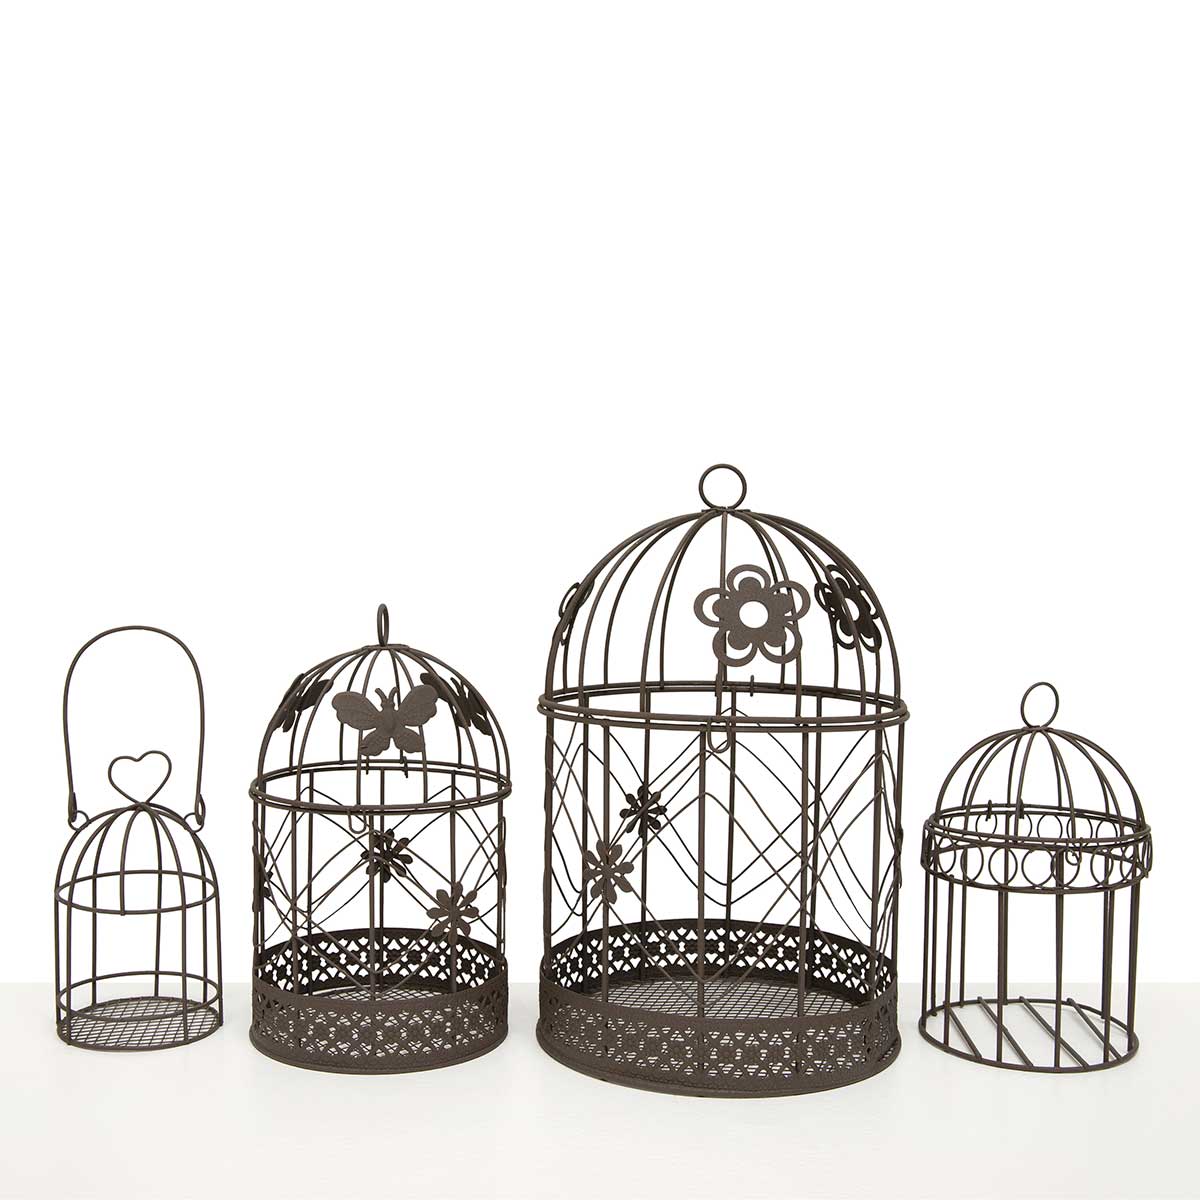 BIRD CAGE VOTIVE HOLDER HEART 3IN X 5IN BROWN METAL - Click Image to Close